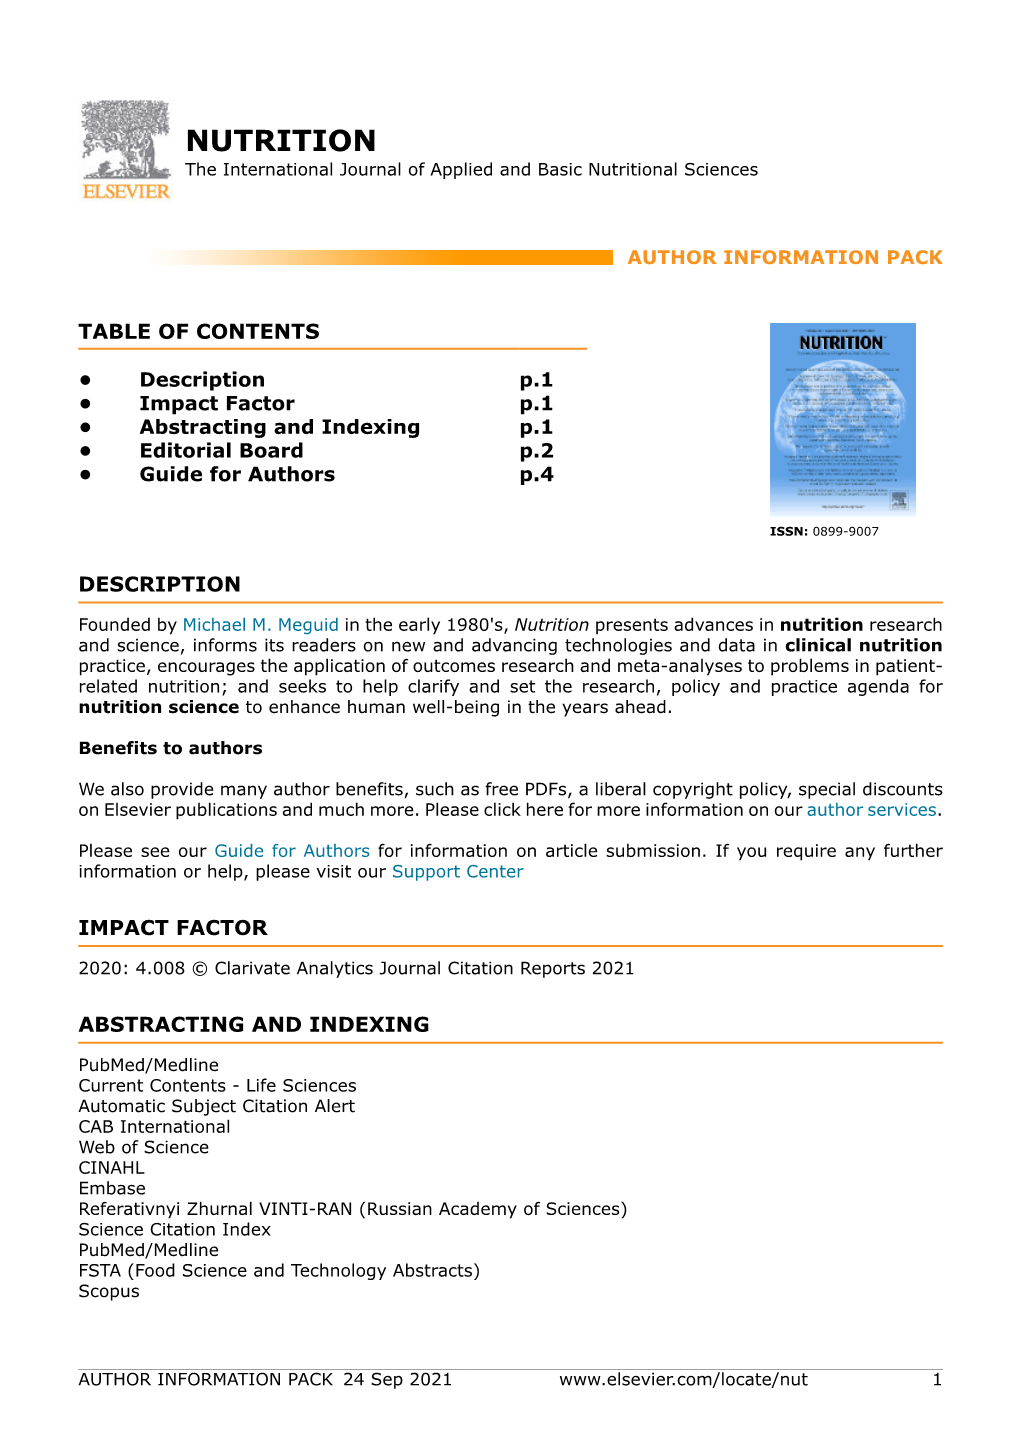 NUTRITION the International Journal of Applied and Basic Nutritional Sciences